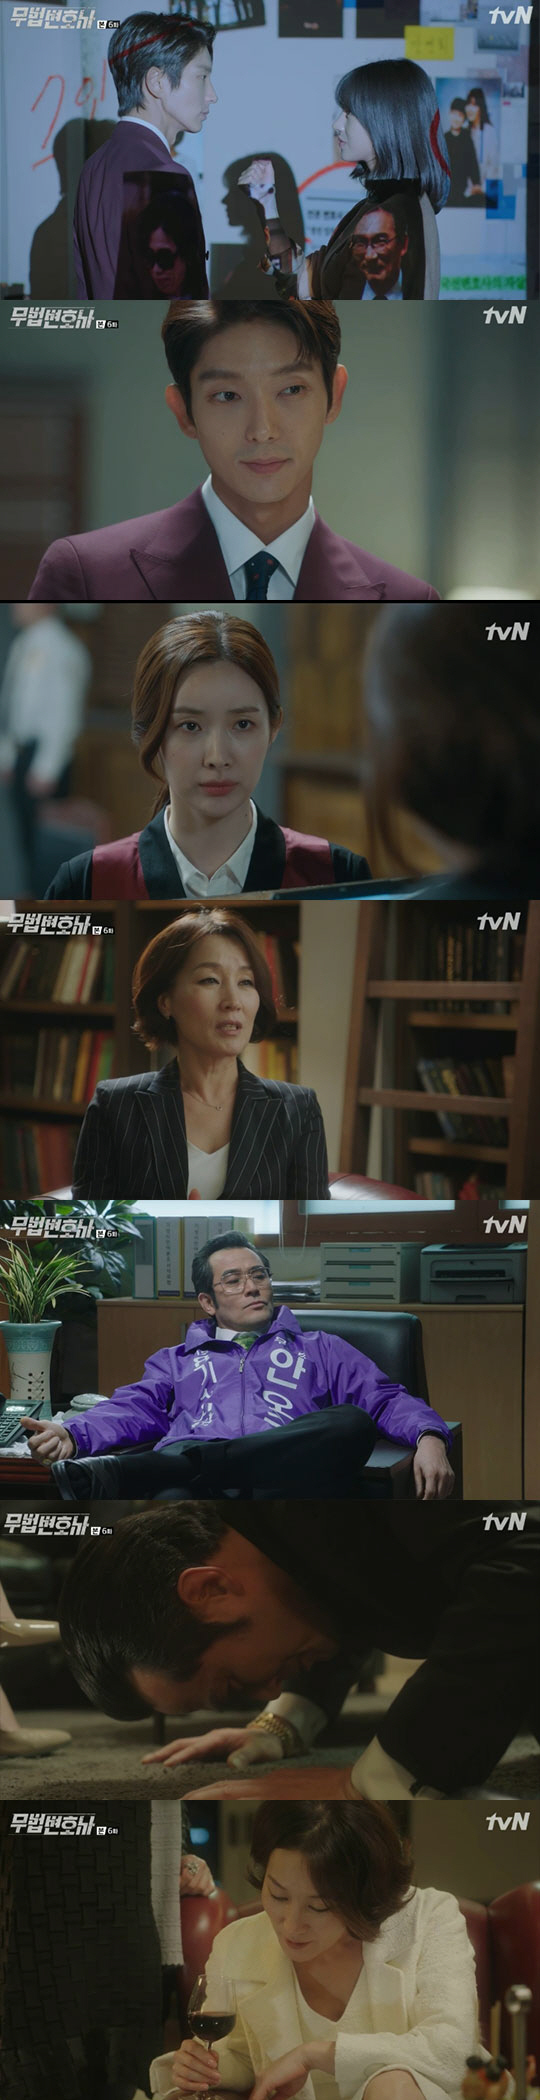 The mother of Lawless Lawyer Seo Ye-ji was alive; Cha Jung-won, who was thrashed by Lee Joon-gi, was loyal to Lee Hye-Yeong.On the 27th, TVN Lawless Lawyer showed Bong Sang-pil (Lee Joon-gi) and Seo Ye-ji, who disclosed that a direct investigator of Kang Yeon Hee (Cha Jung-won) had Falsify the scene of the mayors murder.On this day, Ha Jae-yi found a picture of himself and his mother in his childhood in Bong Sang-pils study.Bong Sang-pil said that the person who killed his mother and kidnapped Ha Jae-yis mother was An Oh-ju (Choi Min-soo), and that there was Lee Hye-Yeong behind it.He added that all of them were photographs taken by Ha Jae-yis mother, who was shocked by the truth of Cha Moon-sook, who followed like her mother.Bong Sang-pil said, I came to tell Ha Jae-yi the truth to revenge that I came back to the establishment. Ha Jae-yi also said he would believe him.Ha Jae-yi went to Woo Hyung-man (Lee Dae-yeon) and said, What did you do with the woman who was kidnapped together? Thats my mother. Did you kill her?Prosecutor Kang Yeon Hee (Cha Jung-won) felt the leak of investigative secrets, but did not know that his investigator was the snitch of An Oh-ju.Back at the office, Ha Jae-yi backhugged Bong Sang-pil and said, Please stay here and a little bit. Then they stared at each other affectionately. Ha Jae-yi said, Have you lived this and 18 years?, and Bong Sang-pil hugged hard and said, Its going to be harder ahead. The two had a sweet night following a friendly kiss.Anoju had a bitter emotional confrontation with Nam Soon-ja (Yum Hye-ran) and her daughter Kang Yeon Hee; Nam Soon-ja said, Dont put my daughters name on a rotten mouth.I did not make a daughter test to clean up the back of a human like you, but I did not have enough time.Anoju said he would release his Oju group as a blank trust, and Cha Moon-sook gave him strength, saying, I support people who want to throw away than people who want to have everything.Woo Hyung-man shot at An-o-ju, who came to him, saying, Get out of here, you gangster. The original detective is a gangster like you.In the Woo Hyung-man trial, Bong Sang-pil applied for Ahn Oh-ju as a witness, while disclosing all the cases with the help of Cha Jung-won as evidence video that the Falsify person was Kang Yeon Hee.Kang Yeon Hee admitted the evidence Falsify and gave up the indictment; Woo Hyung-mans wife, who has been ill for a long time, closed her eyes comfortably as she saw her husbands innocenceCha called Kang Yeon Hee separately and said, You said you wanted to be closer to me than Jay. Now?, and Cha Jung-won vowed allegiance, saying, I want to be a stronger prosecutor than anyone. Cha Moon-sook brought Kang Yeon Hee into a group of seven people who ruled the establishment, calling it a real established in the established world.Meanwhile, Ha Jae-yis mother was alive, with Woo Hyung-man calling her and saying, If I die....